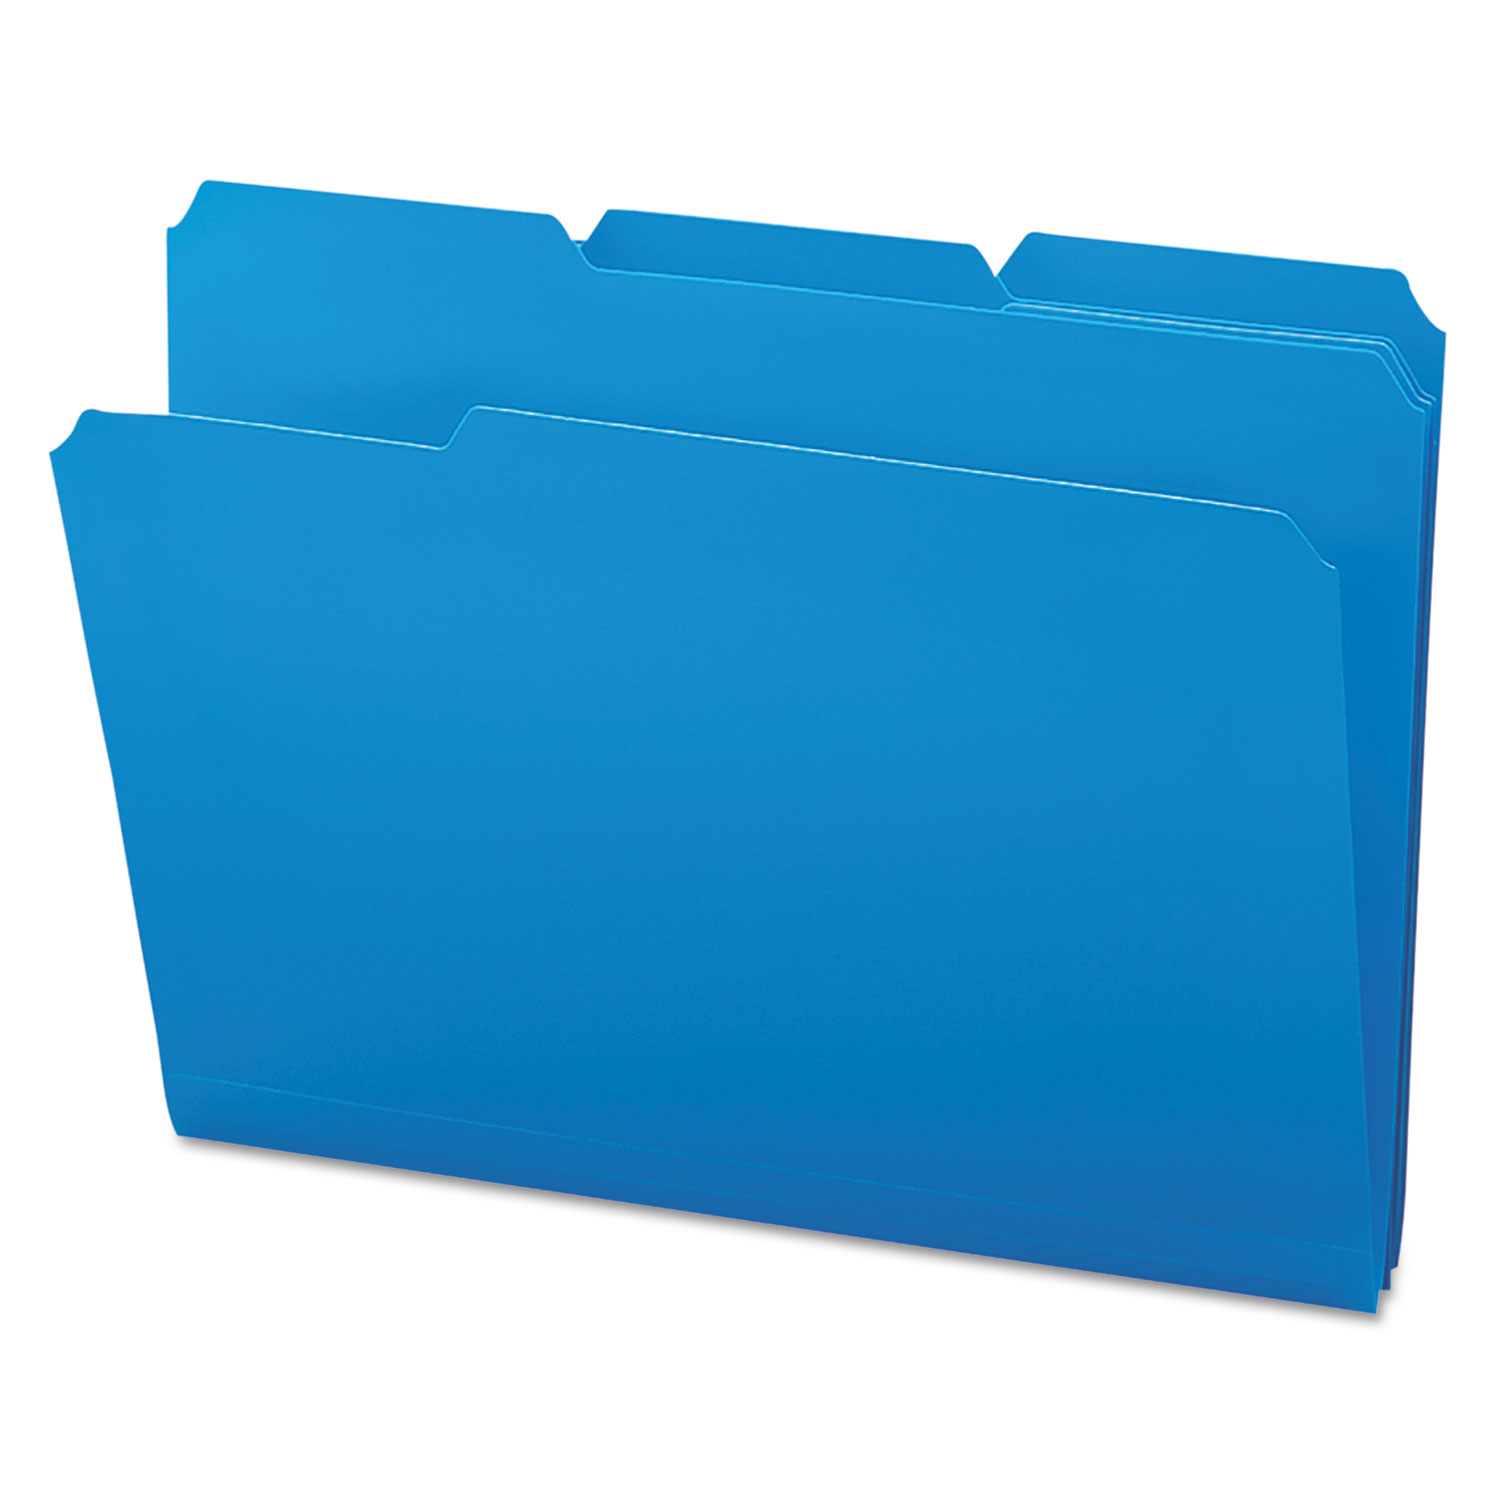  Smead 10503 Top Tab Poly Colored File Folders, 1/3-Cut Tabs, Letter Size, Blue, 24/Box (SMD10503) 